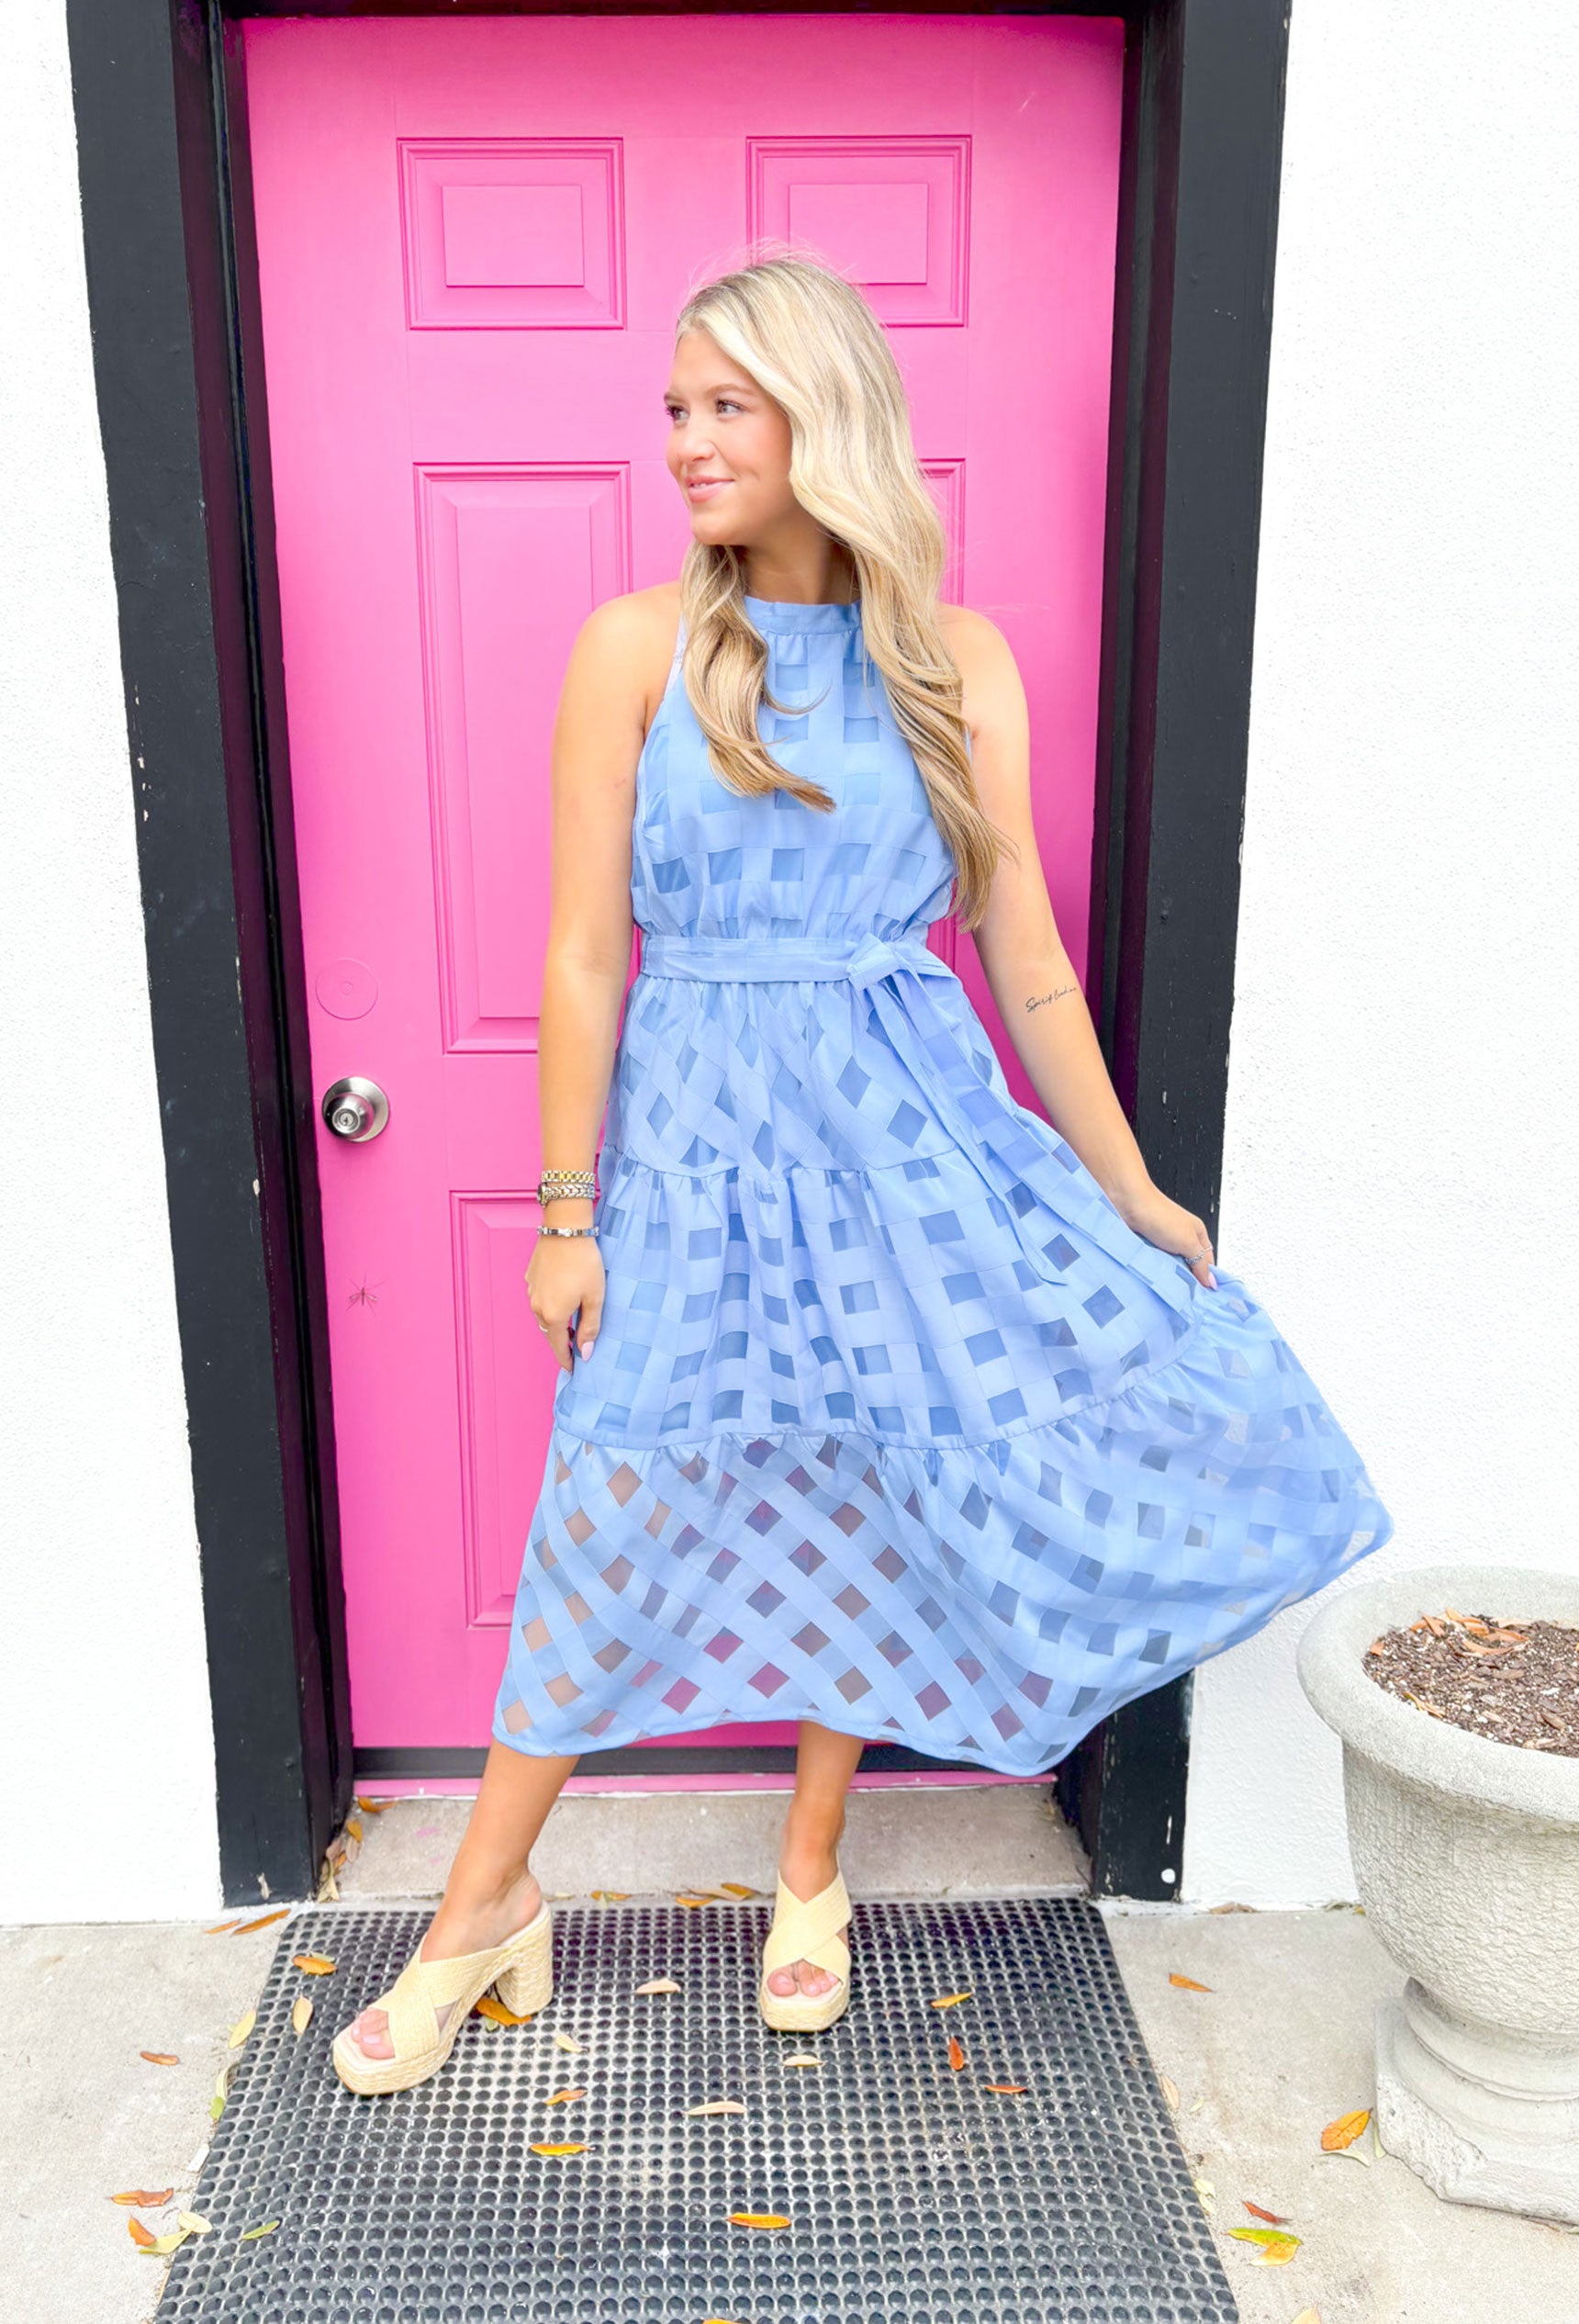 Date Night In Paris Midi Dress, halter neck light blue dress with sheer gingham overlay with tie detail at the waist 